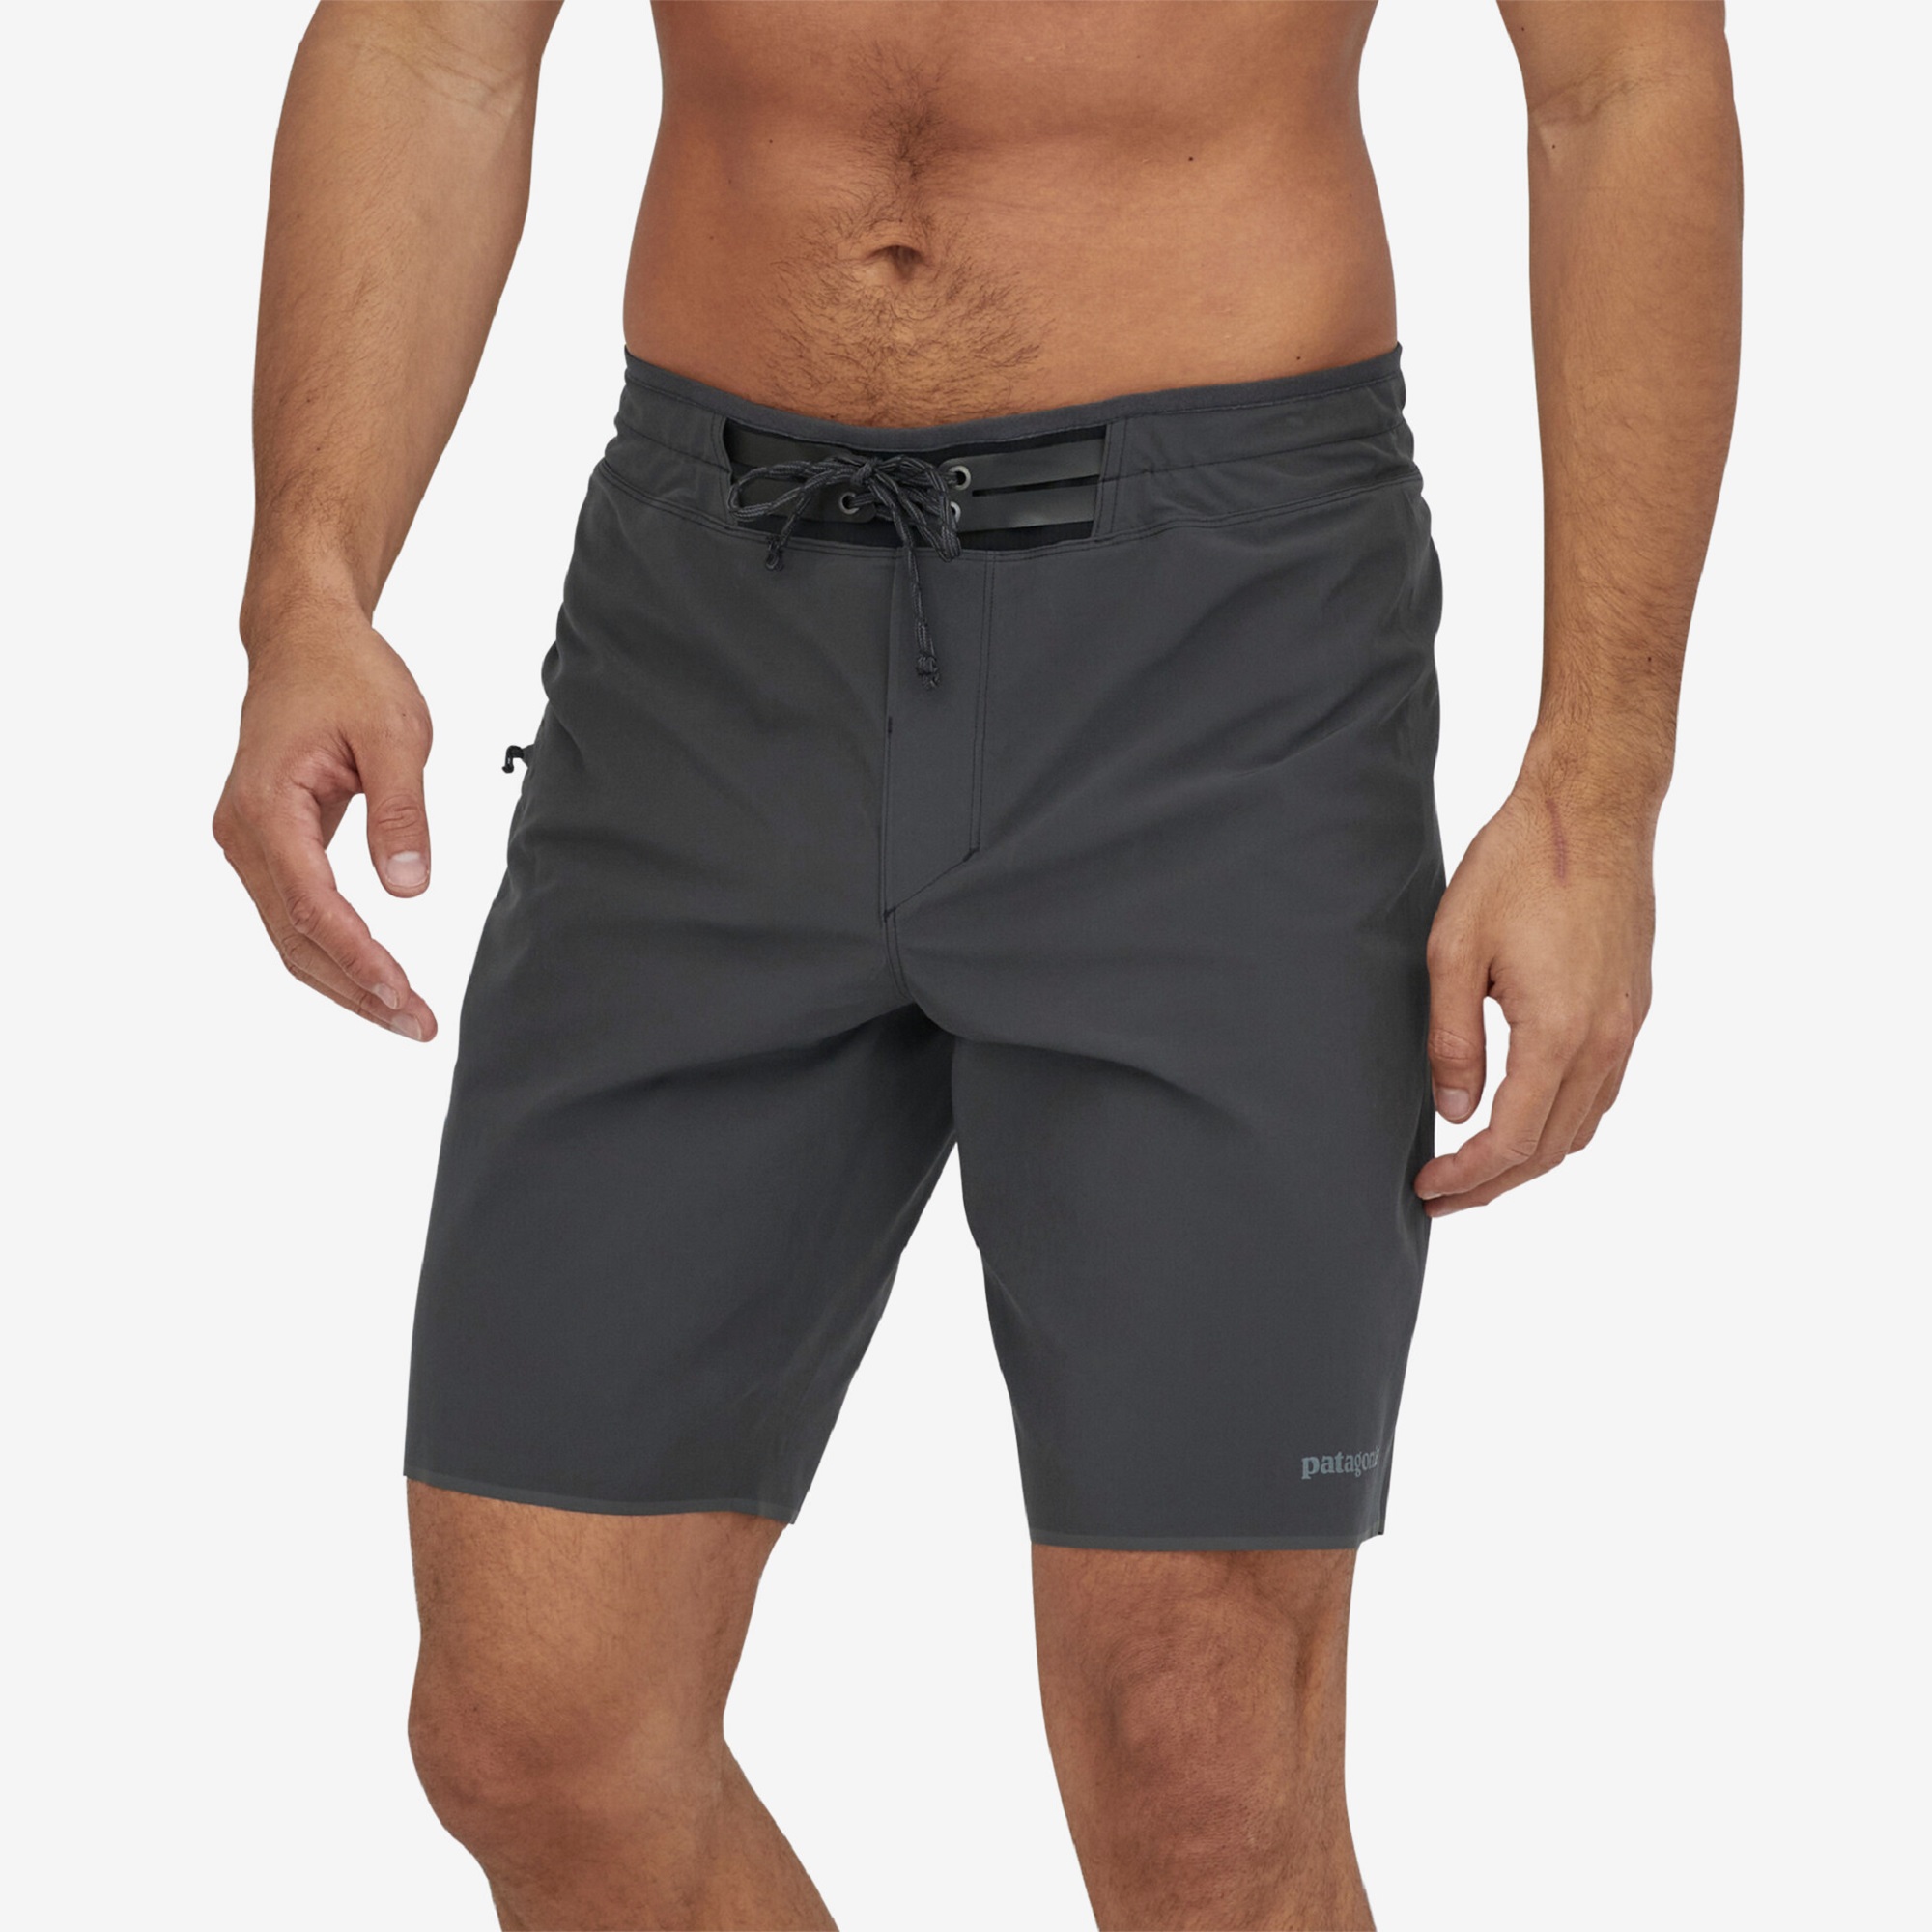 The best board shorts for summer are fun, comfy, and eco-friendly ...